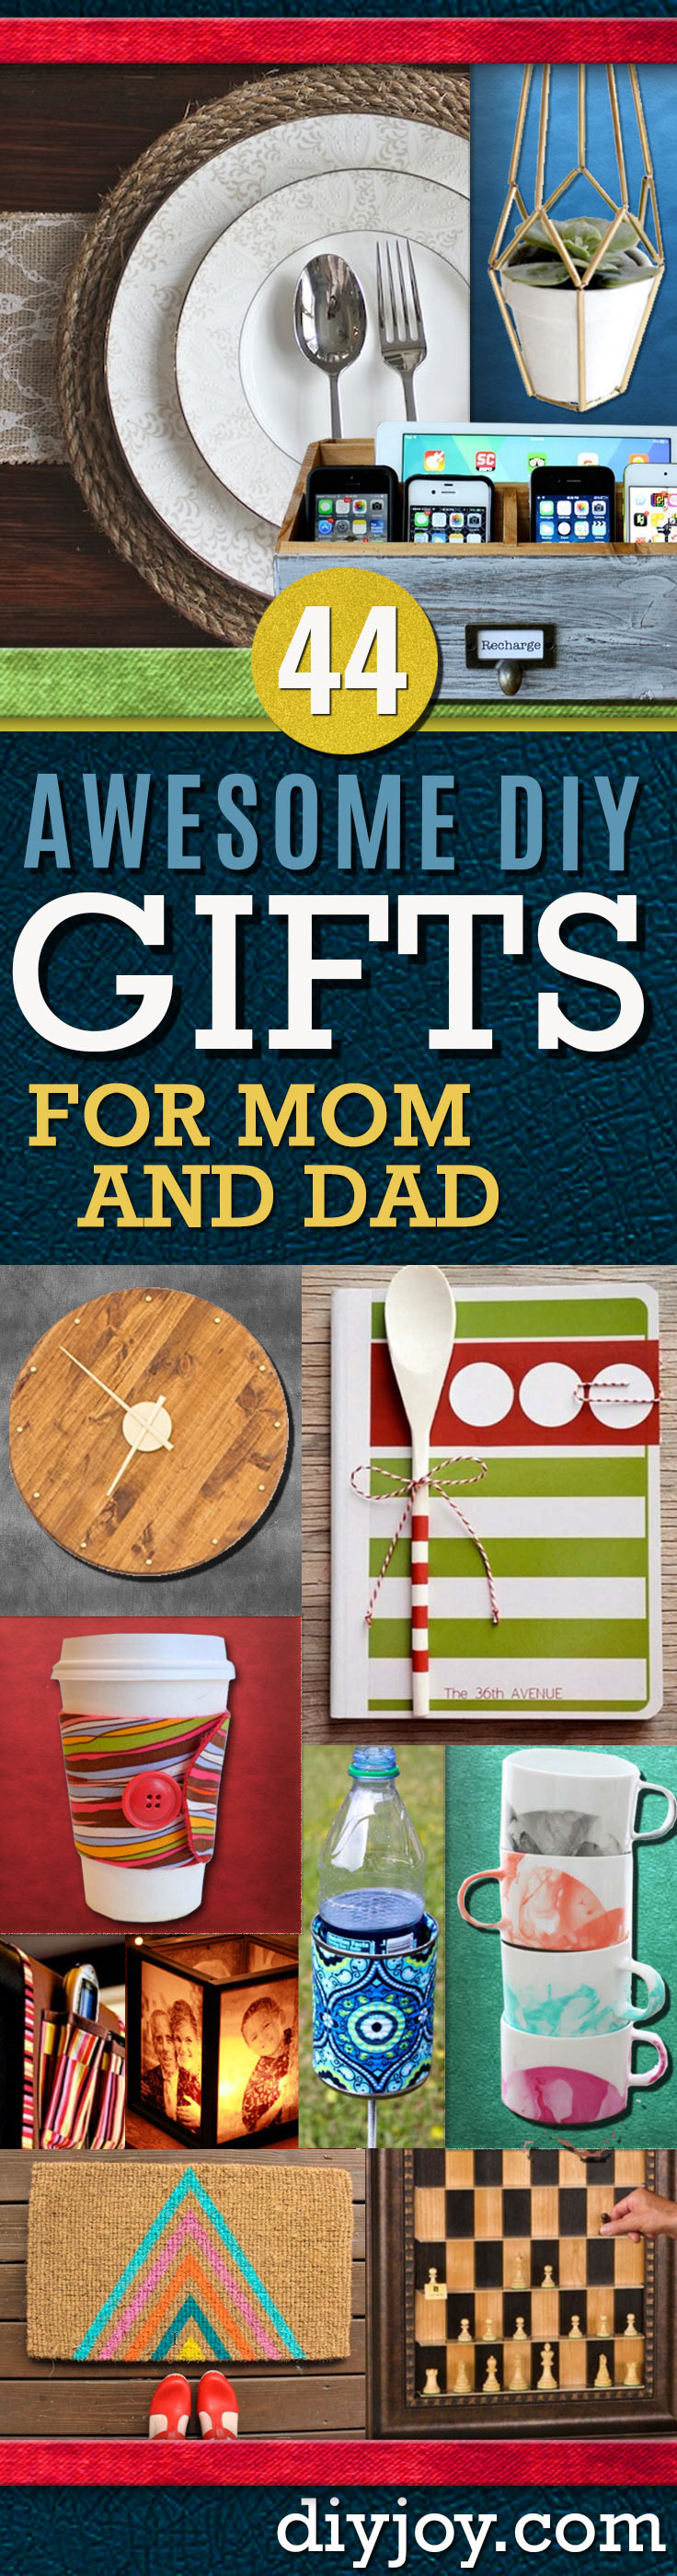 Dad Christmas Gift Ideas
 Awesome DIY Gift Ideas Mom and Dad Will Love